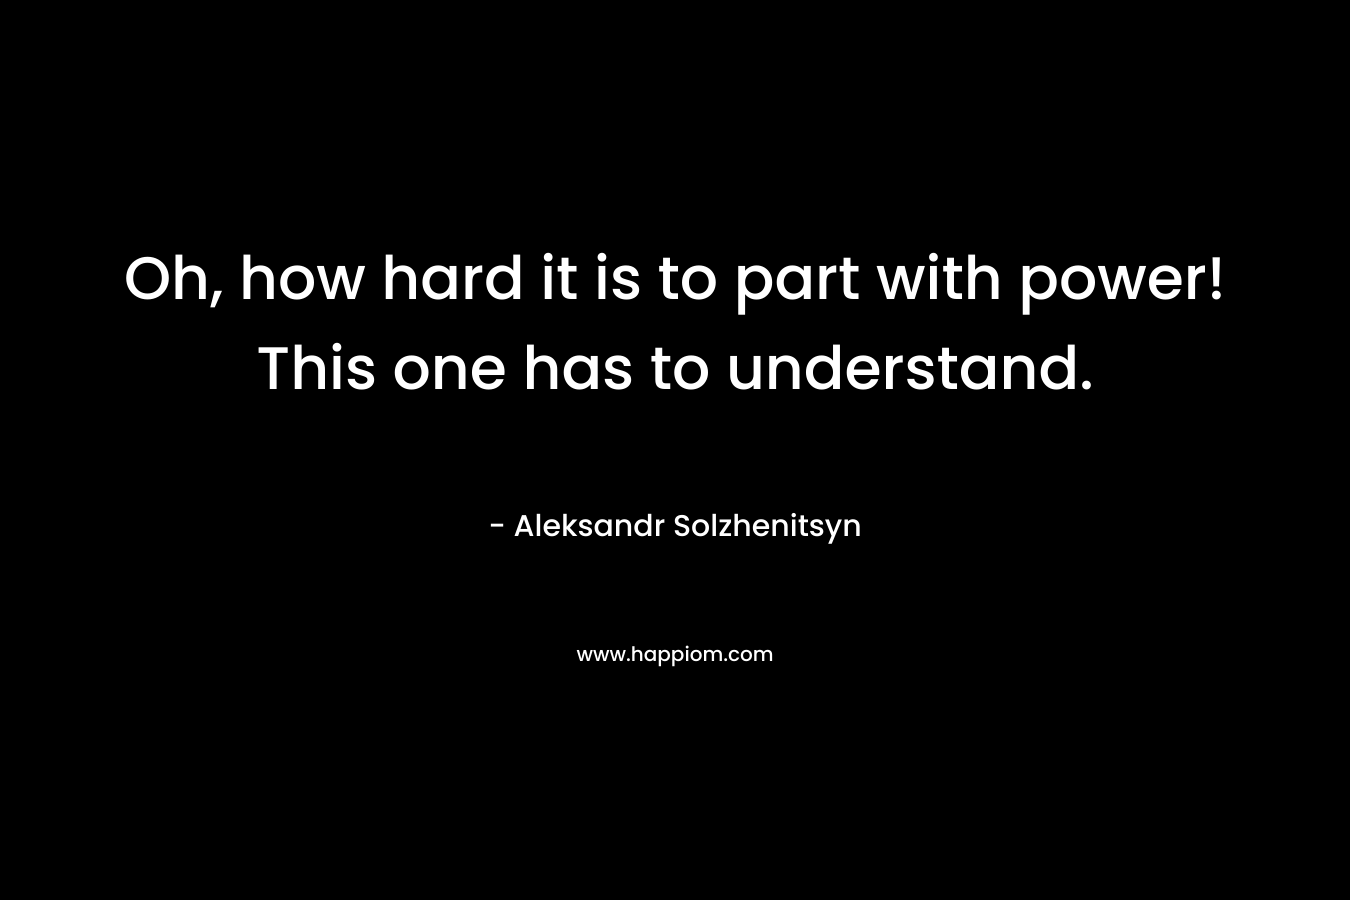 Oh, how hard it is to part with power! This one has to understand.